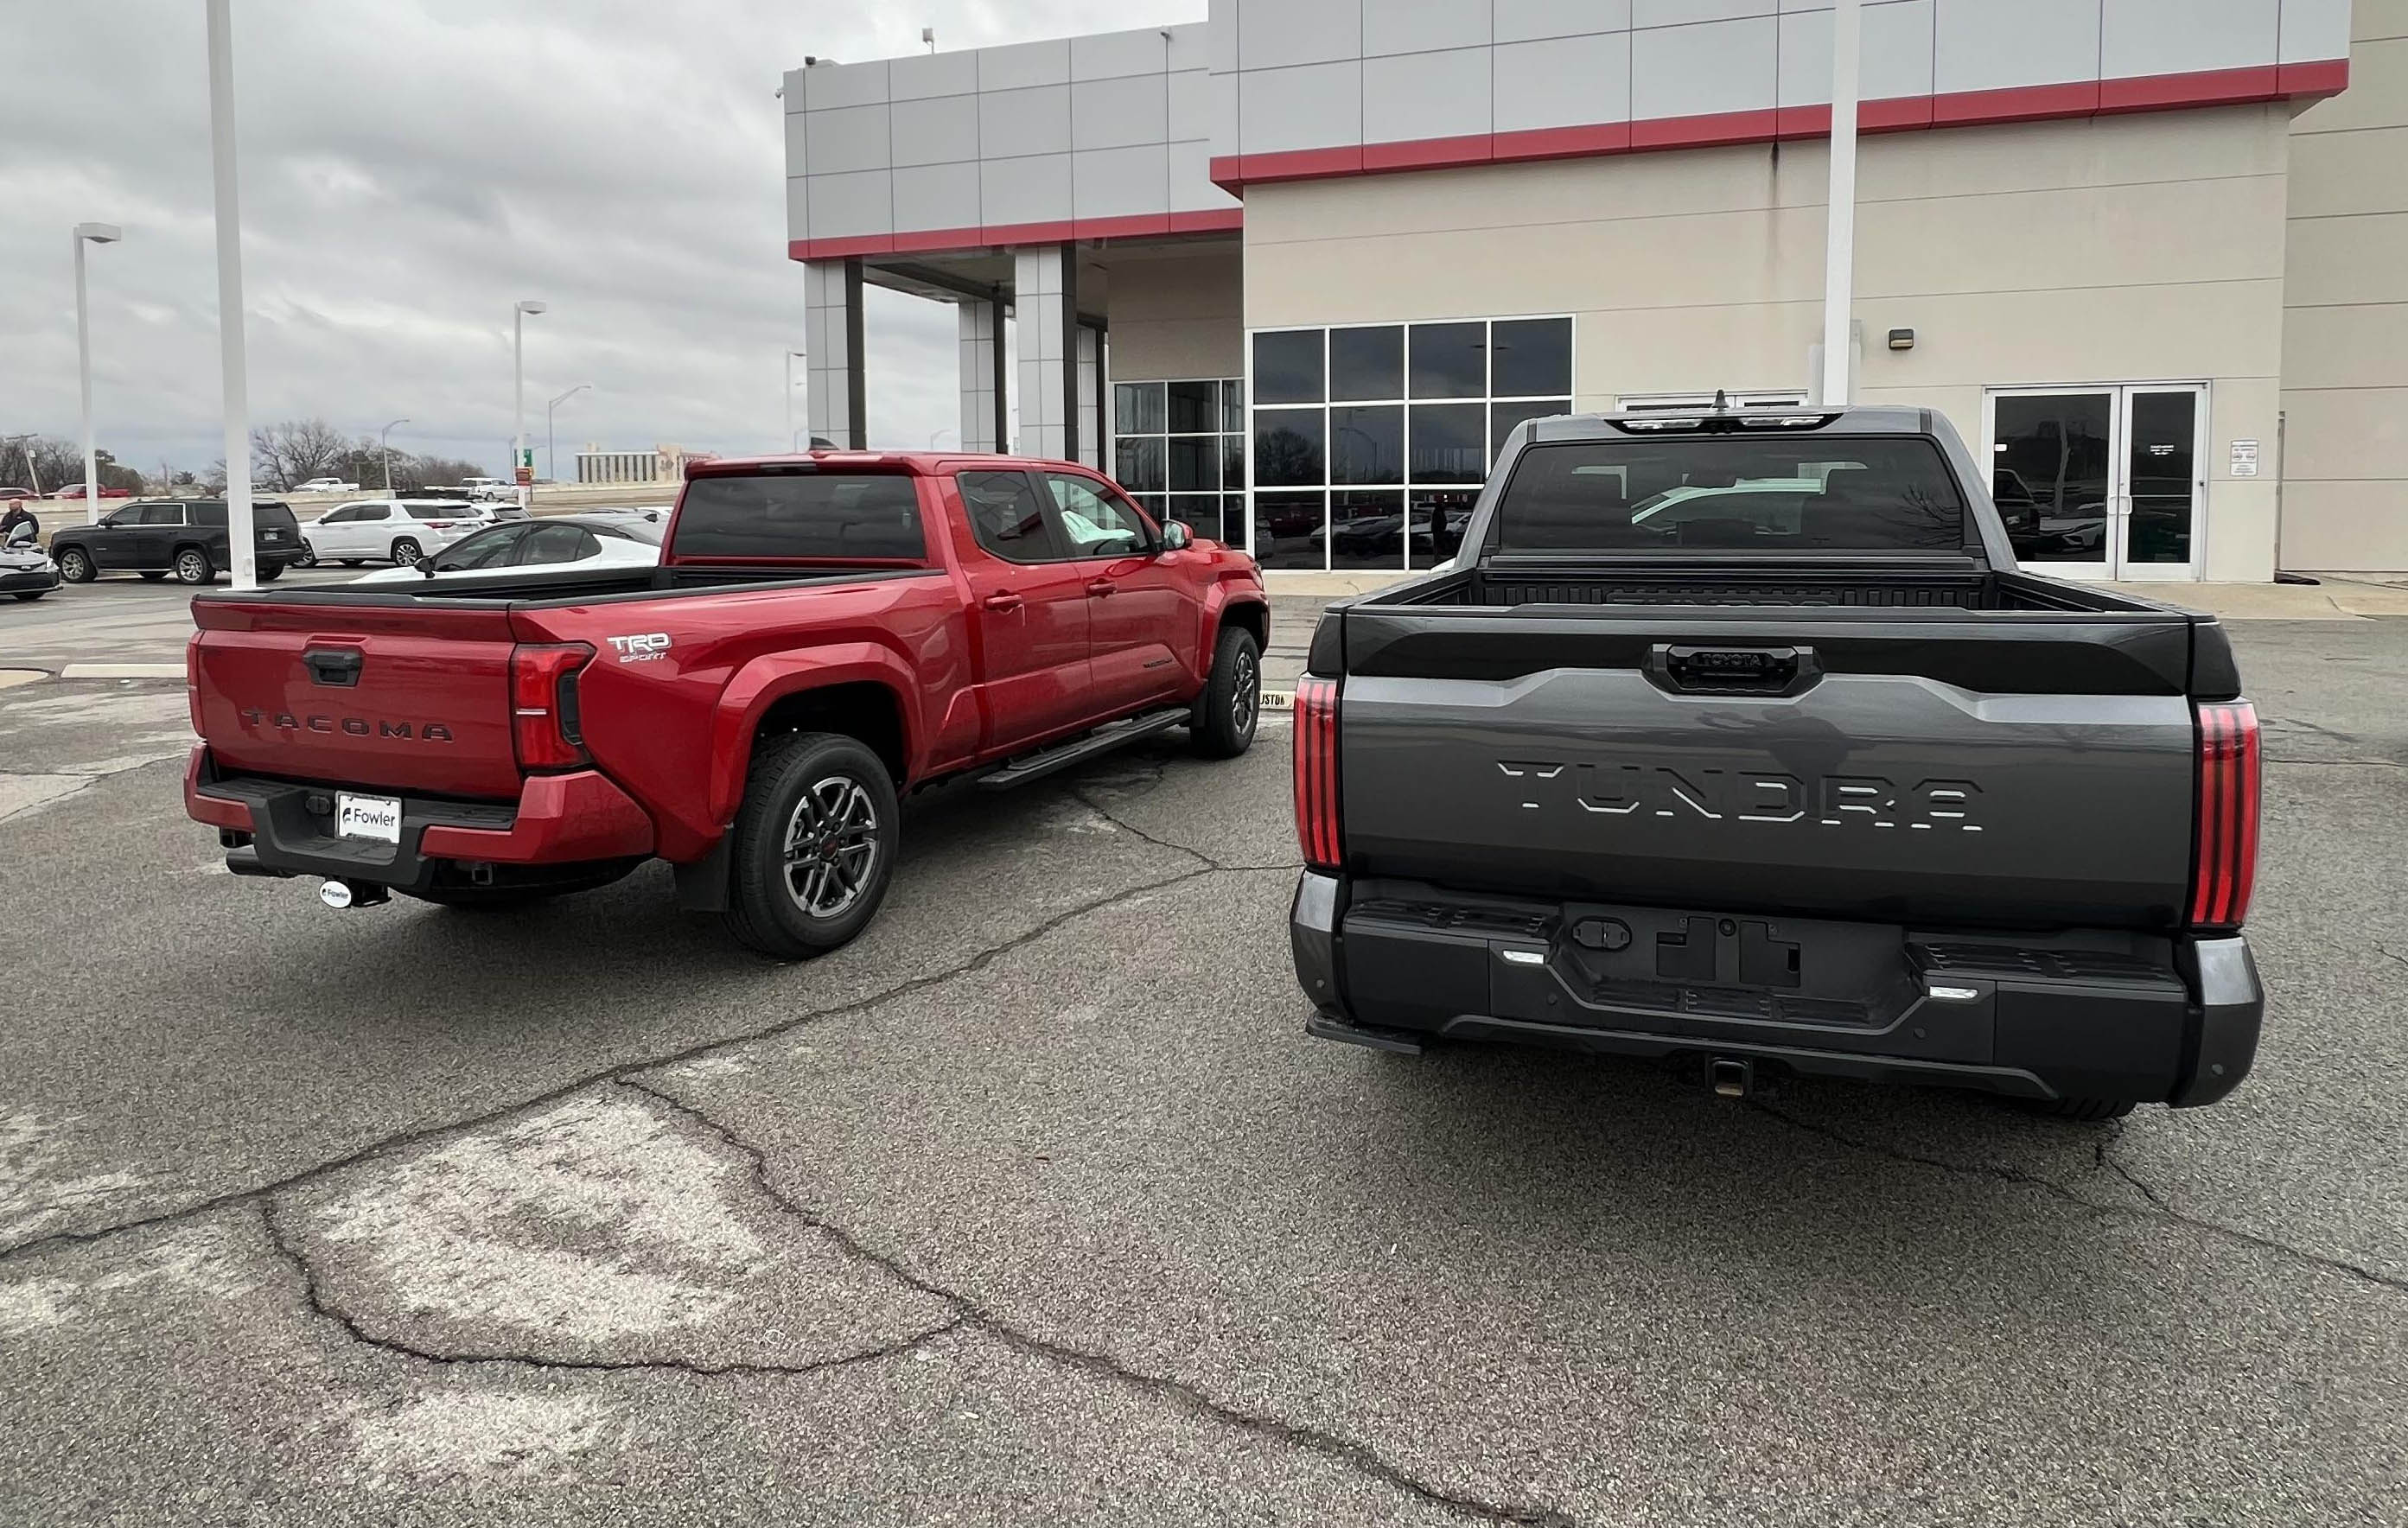 2024 Tacoma Long Bed 2024 Tacoma TRD Sport Double Cab in Supersonic Red (vs. Tundra photos) Long Bed 2024 Tacoma TRD Sport Double Cab in Supersonic Red 1